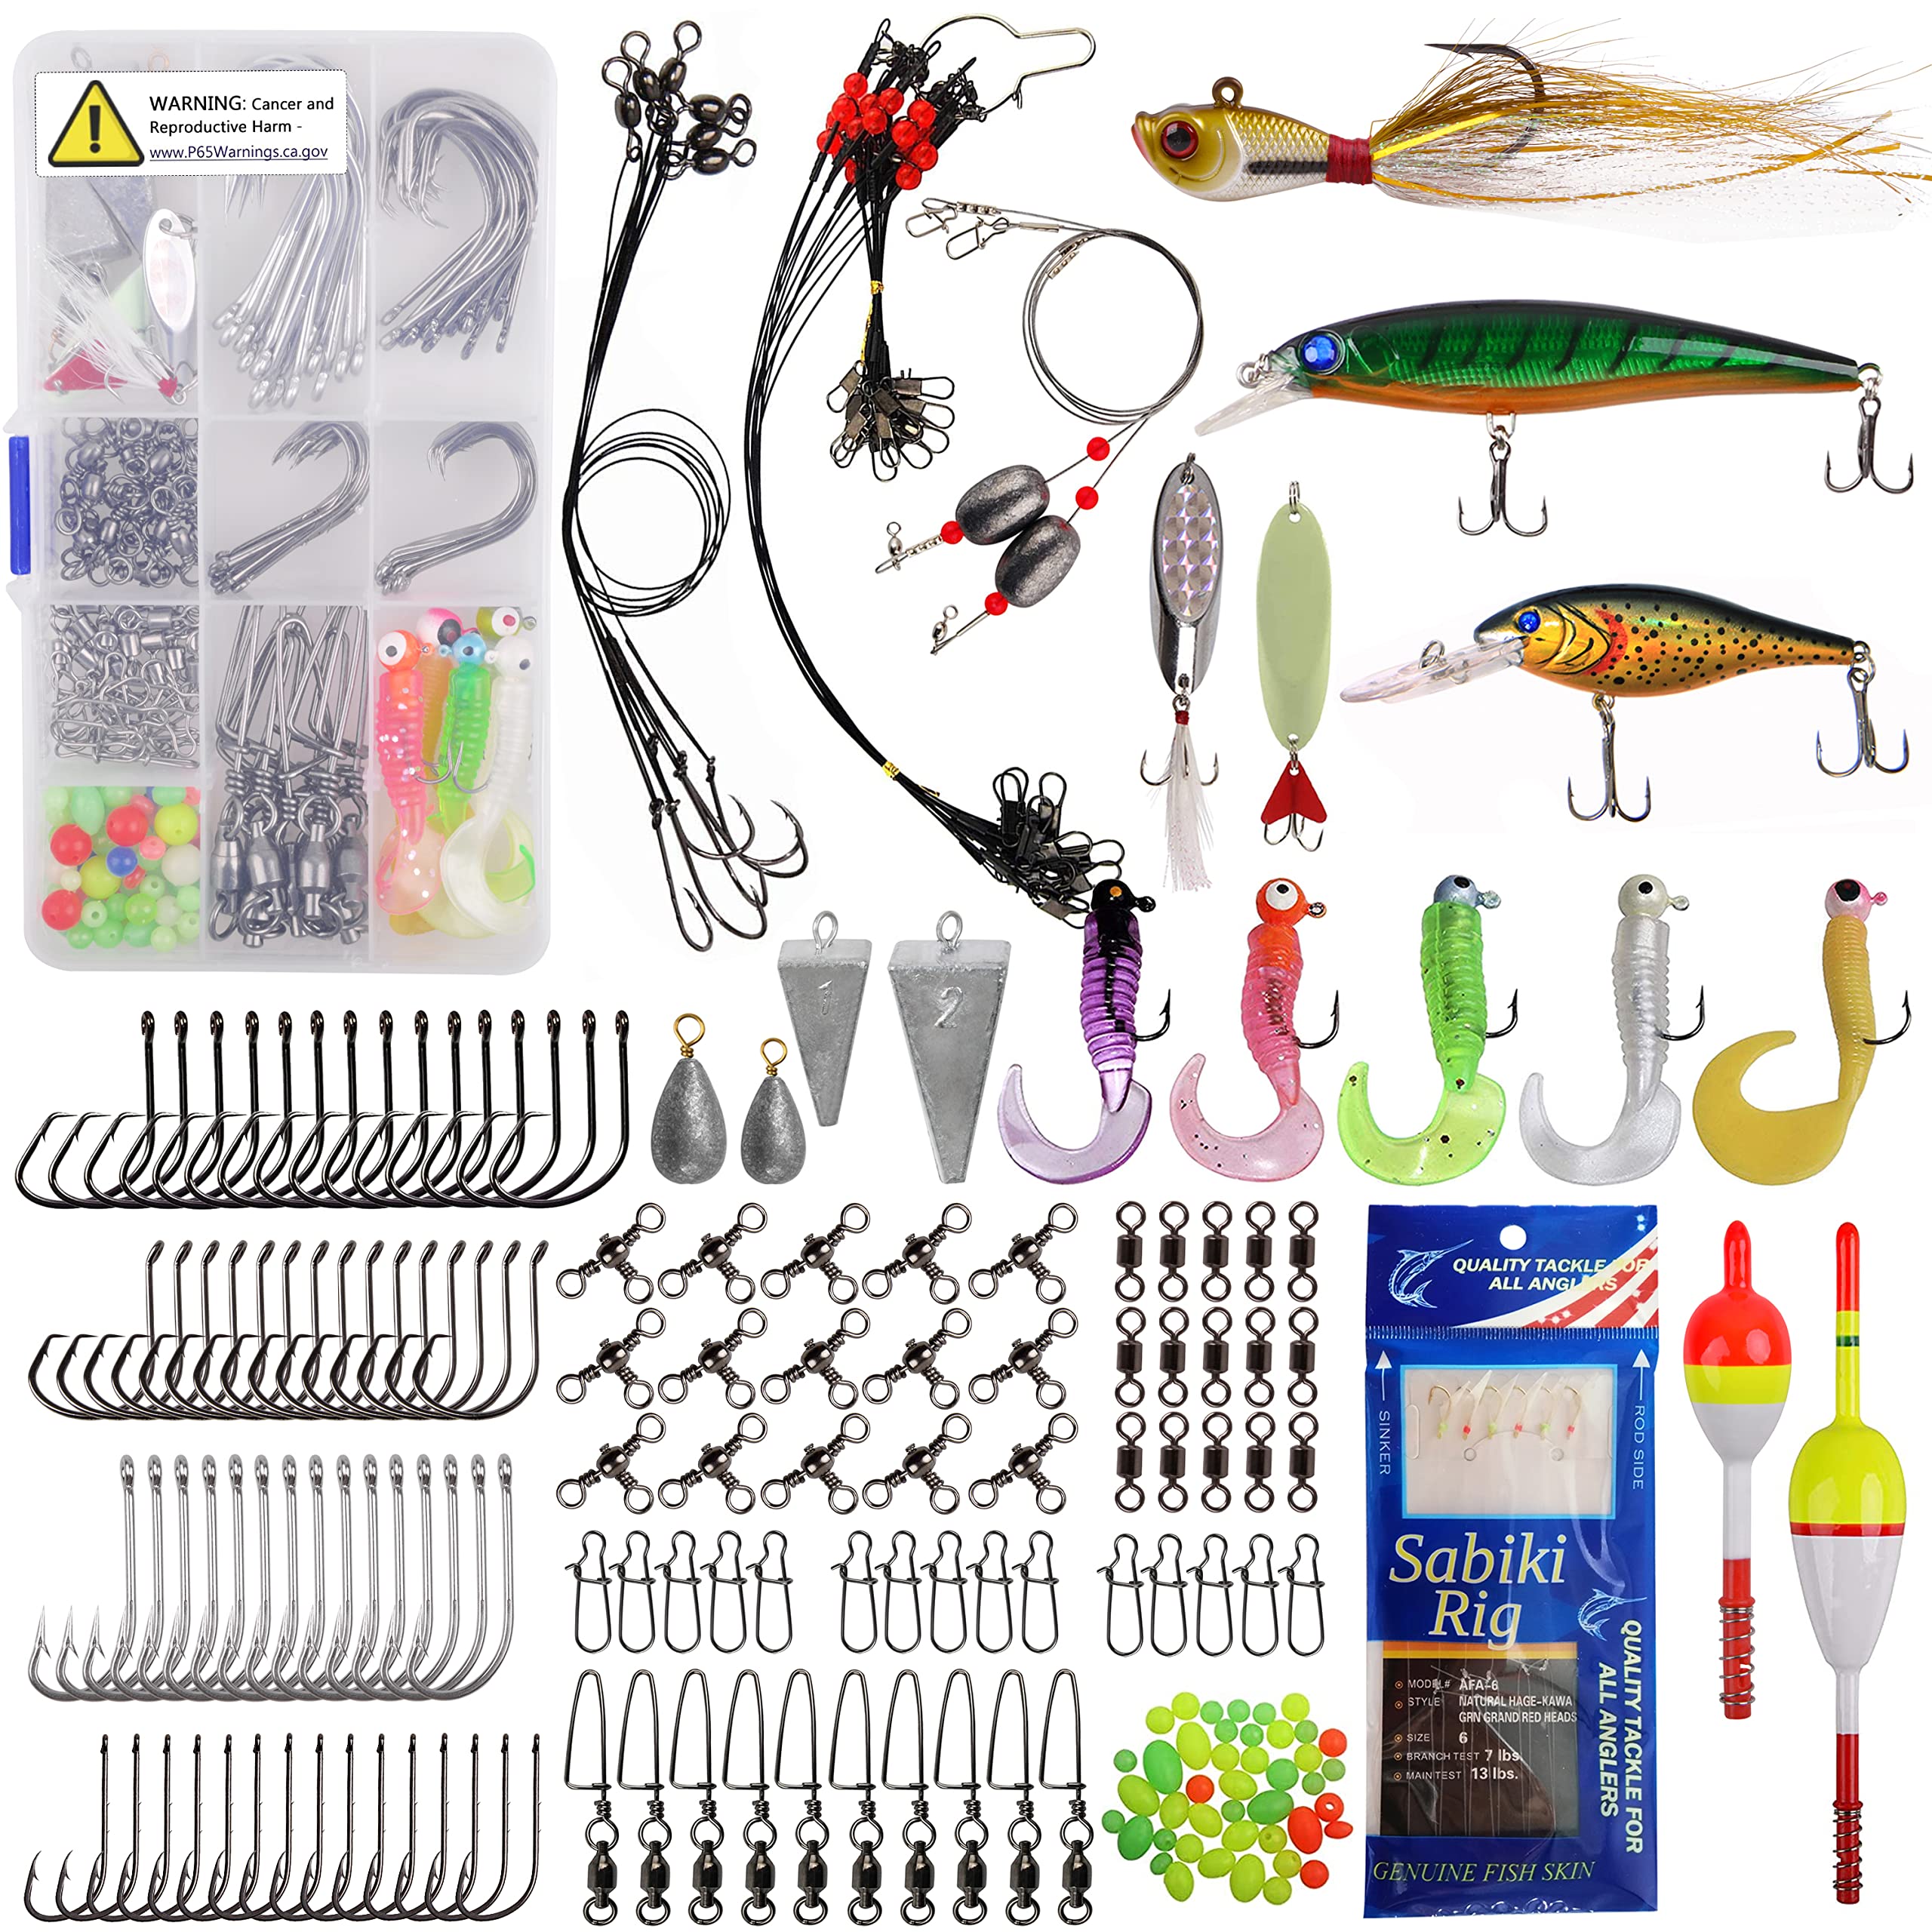  Fishing Lures Tackle Box Bass Fishing Kit,Saltwater and  Freshwater Lures Fishing Gear Spinnerbaits, Plastic Worms, Jigs, Topwater  Lures, Tackle Box : Sports & Outdoors